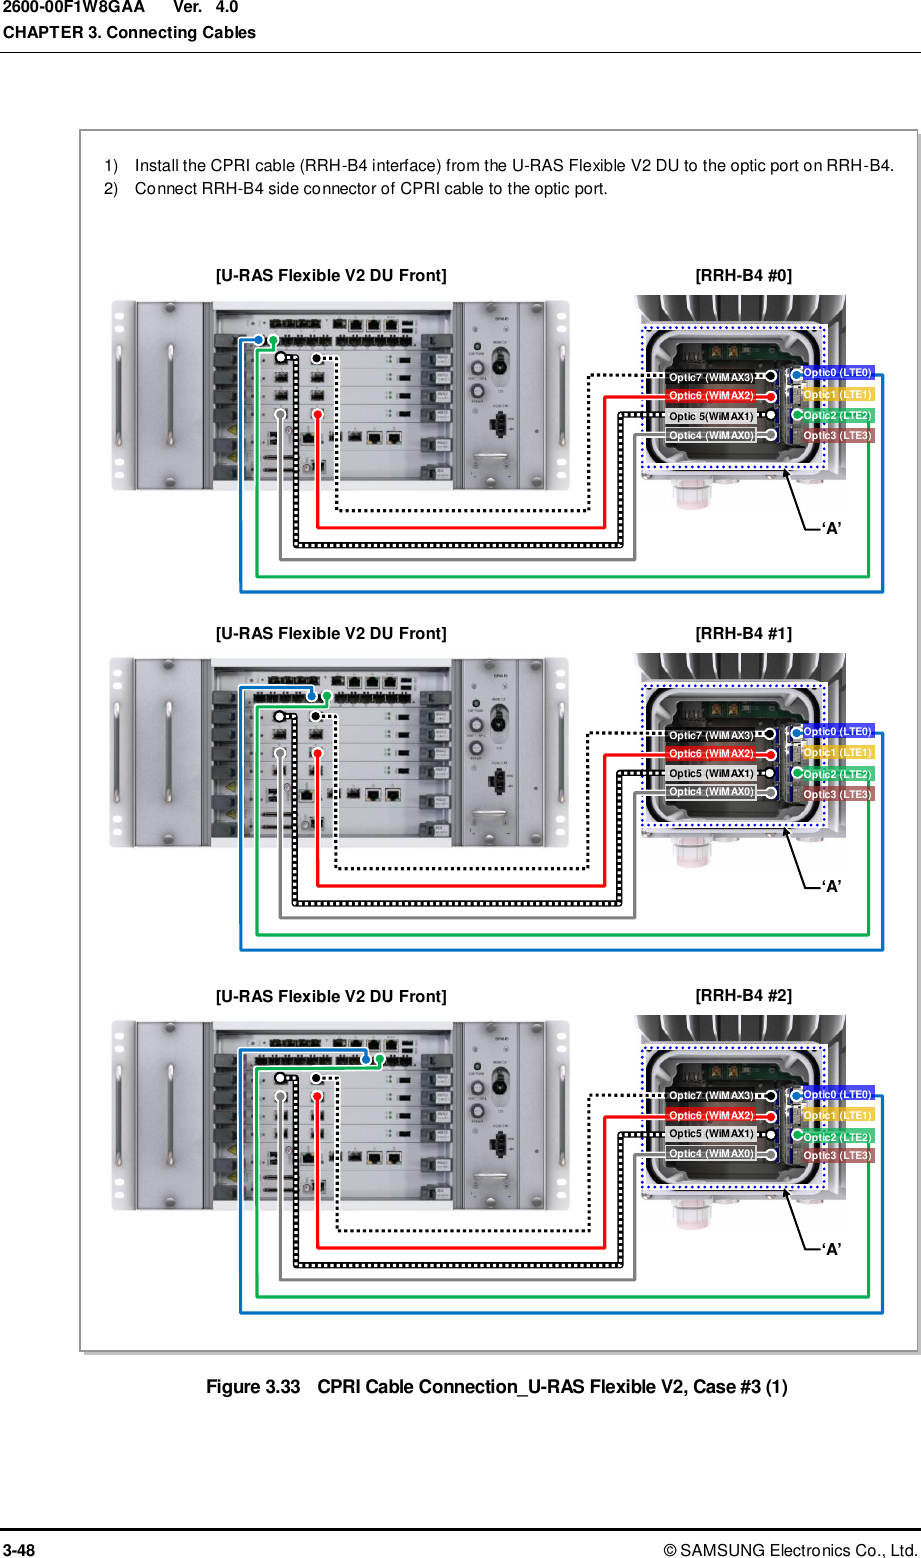  Ver.  CHAPTER 3. Connecting Cables 3-48 ©  SAMSUNG Electronics Co., Ltd. 2600-00F1W8GAA 4.0  Figure 3.33  CPRI Cable Connection_U-RAS Flexible V2, Case #3 (1)  ‘A’ [RRH-B4 #0] 1)    Install the CPRI cable (RRH-B4 interface) from the U-RAS Flexible V2 DU to the optic port on RRH-B4. 2)    Connect RRH-B4 side connector of CPRI cable to the optic port.   [U-RAS Flexible V2 DU Front] ‘A’ [RRH-B4 #1] [U-RAS Flexible V2 DU Front] ‘A’ [RRH-B4 #2] [U-RAS Flexible V2 DU Front] Optic4 (WiMAX0) Optic6 (WiMAX2) Optic5 (WiMAX1) Optic7 (WiMAX3) Optic4 (WiMAX0) Optic6 (WiMAX2) Optic5 (WiMAX1) Optic7 (WiMAX3) Optic4 (WiMAX0) Optic6 (WiMAX2) Optic 5(WiMAX1) Optic7 (WiMAX3) Optic0 (LTE0) Optic1 (LTE1) Optic2 (LTE2) Optic3 (LTE3) Optic0 (LTE0) Optic1 (LTE1) Optic2 (LTE2) Optic3 (LTE3) Optic0 (LTE0) Optic1 (LTE1) Optic2 (LTE2) Optic3 (LTE3) 